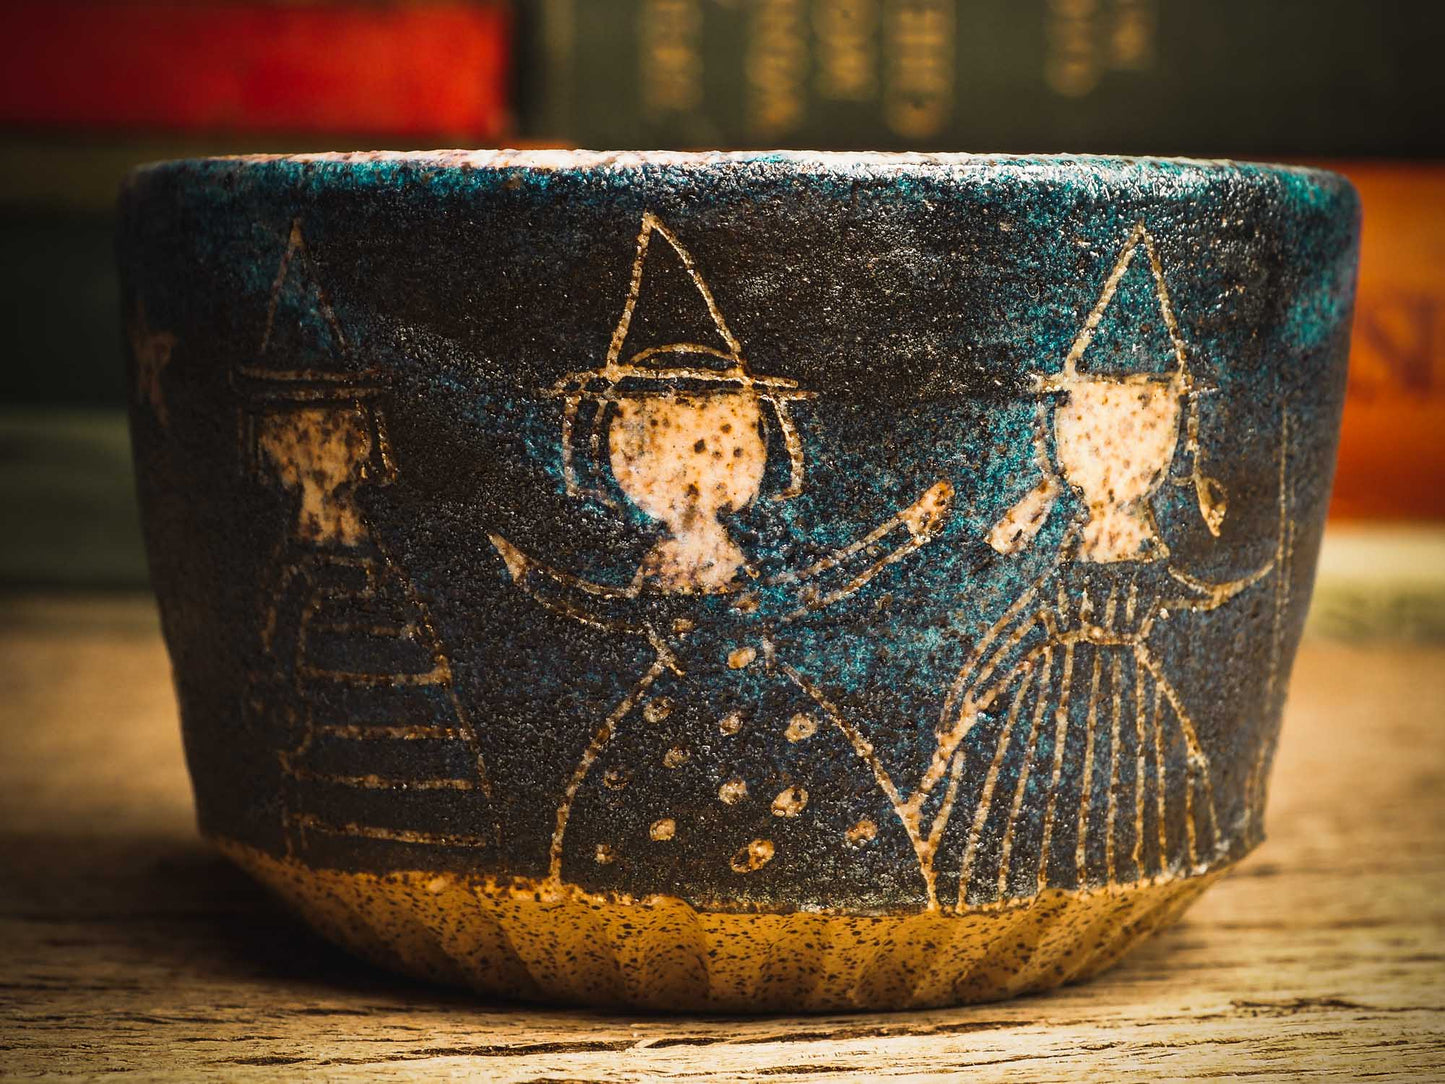 This little handmade ceramic halloween bowl by Idania Salcido Daita art has three witches carved on it, they are ready to cast a spell during a dark starry night, and you can see the magic stream from their wands in subtle bands of color across the deep, midnight blue sky. And of course, the moon and stars are there with them.